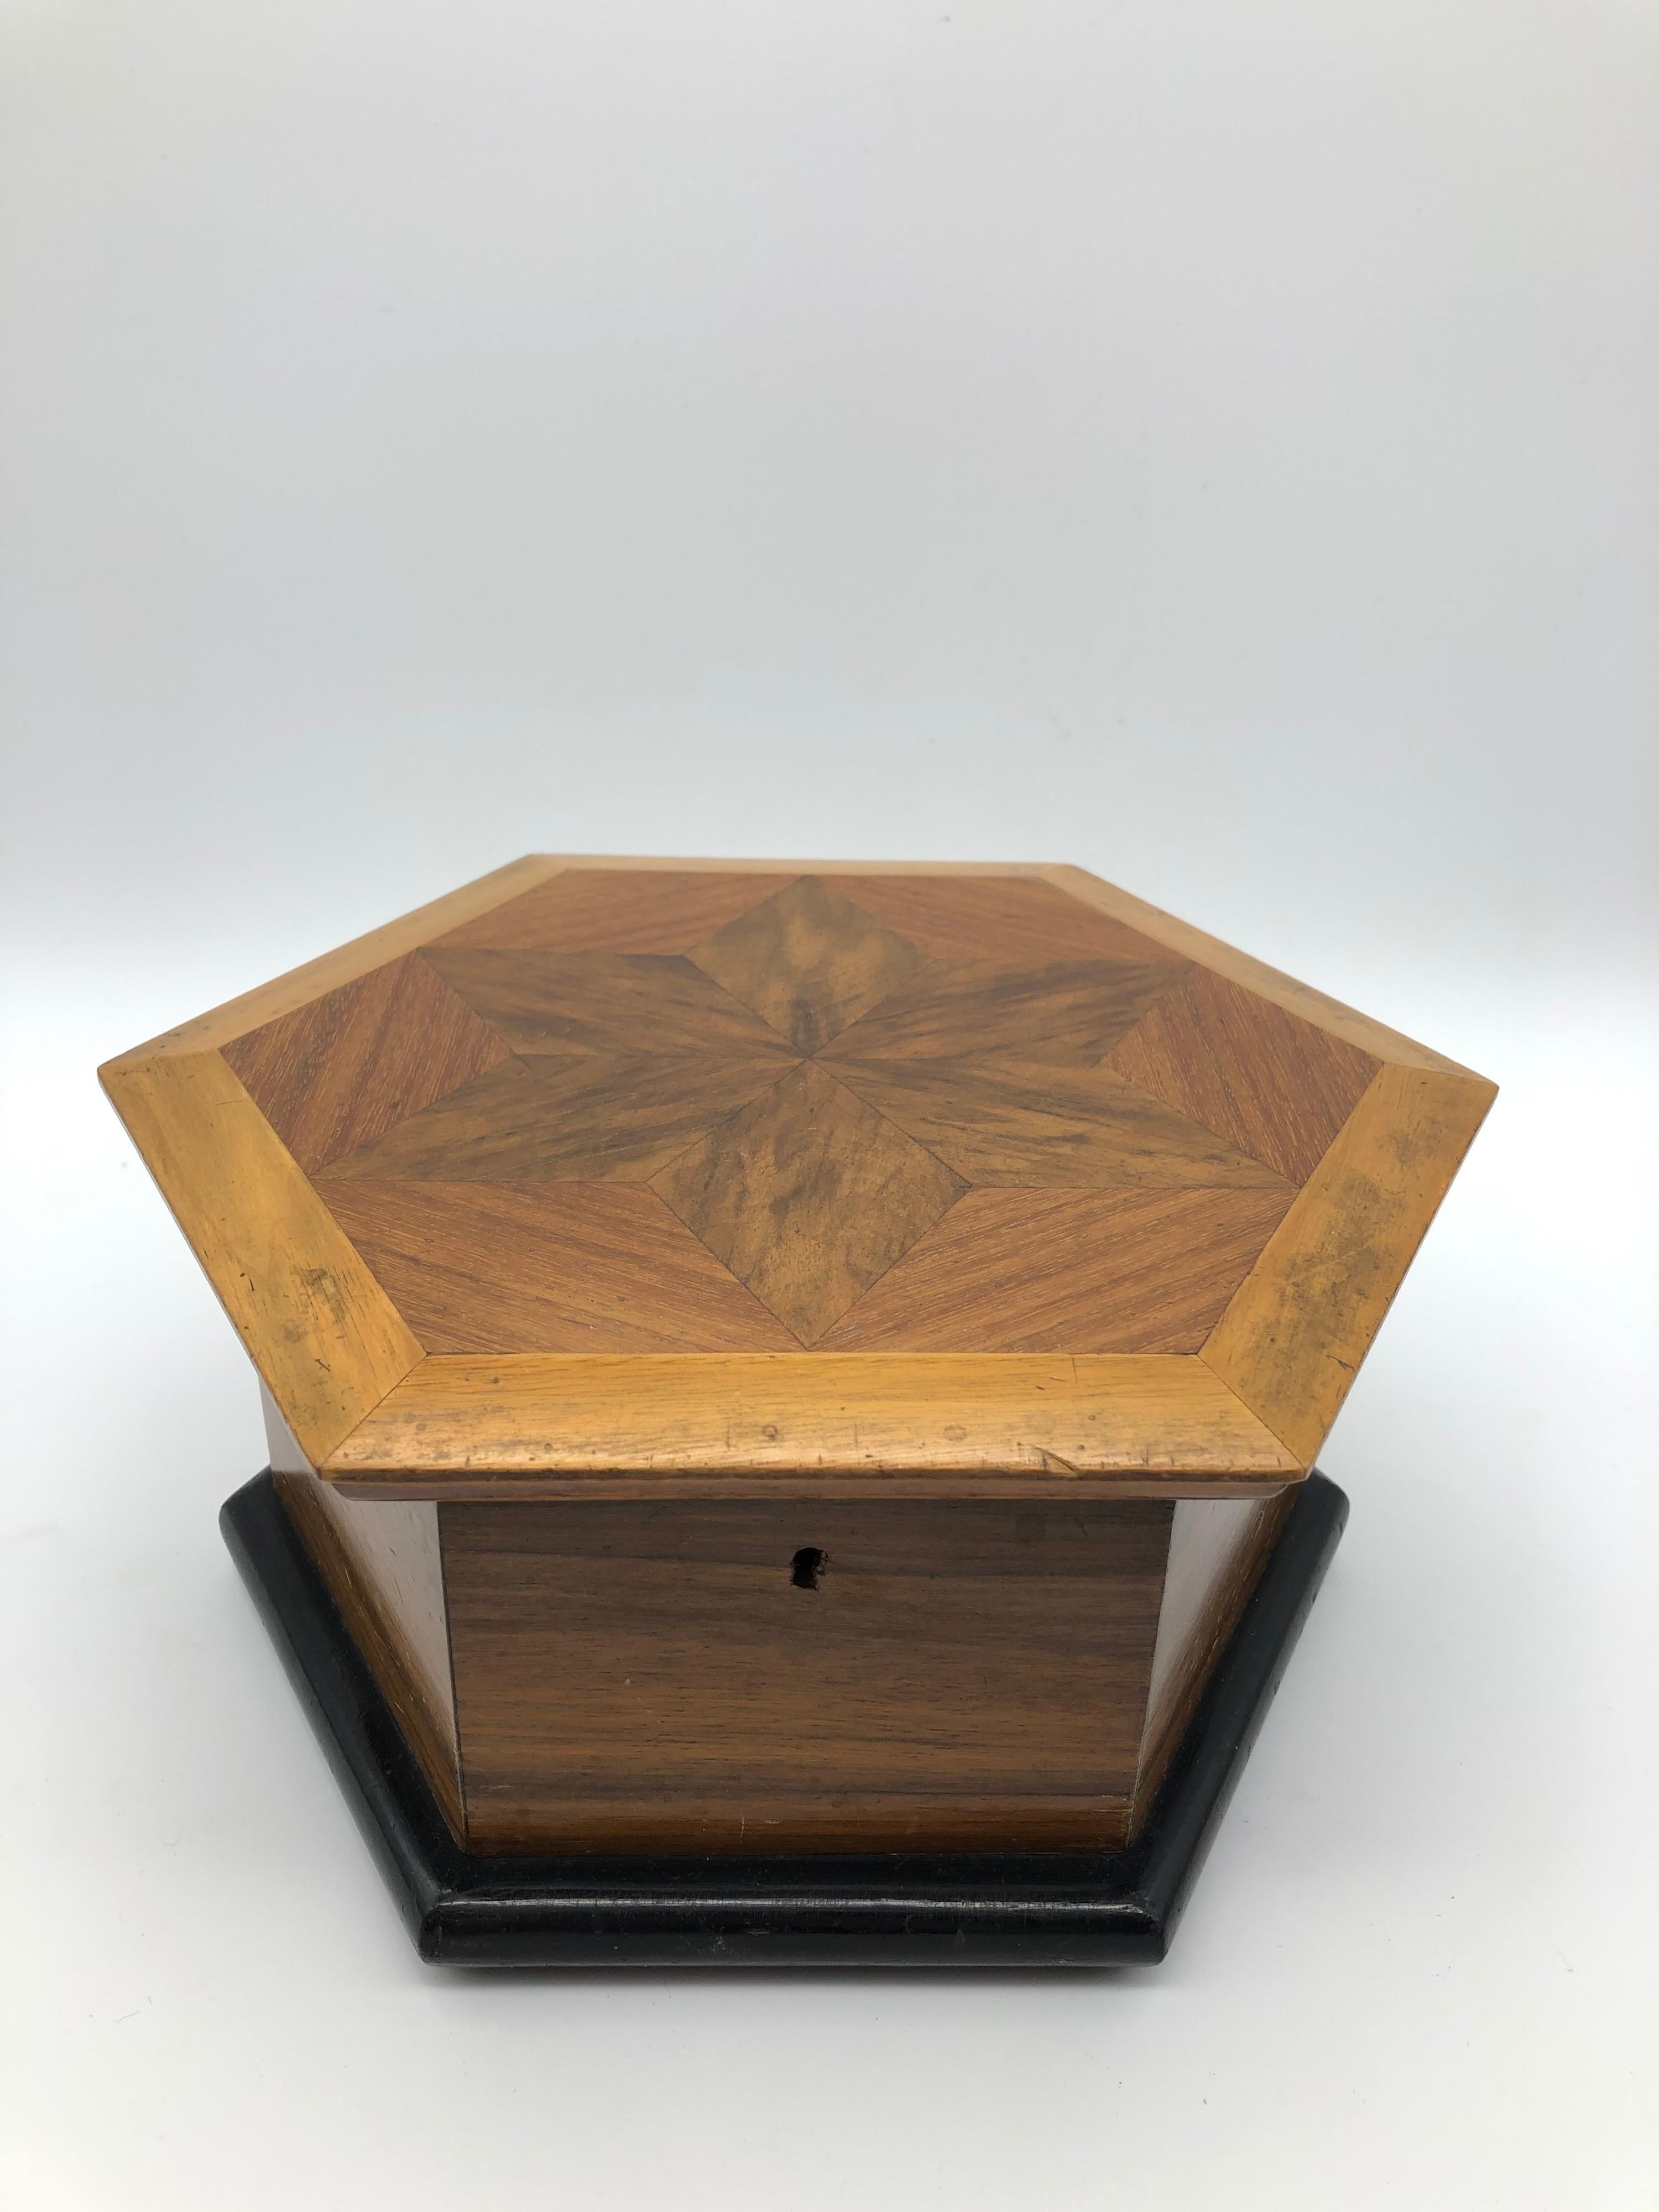 Antique jewelry box wood star inlaid.


The casket was high quality processed

Octagonal body with inlaid lid with mirror

Box is lockable, key is available

Black ebonized base

The casket has been restored and polished!

Measures: